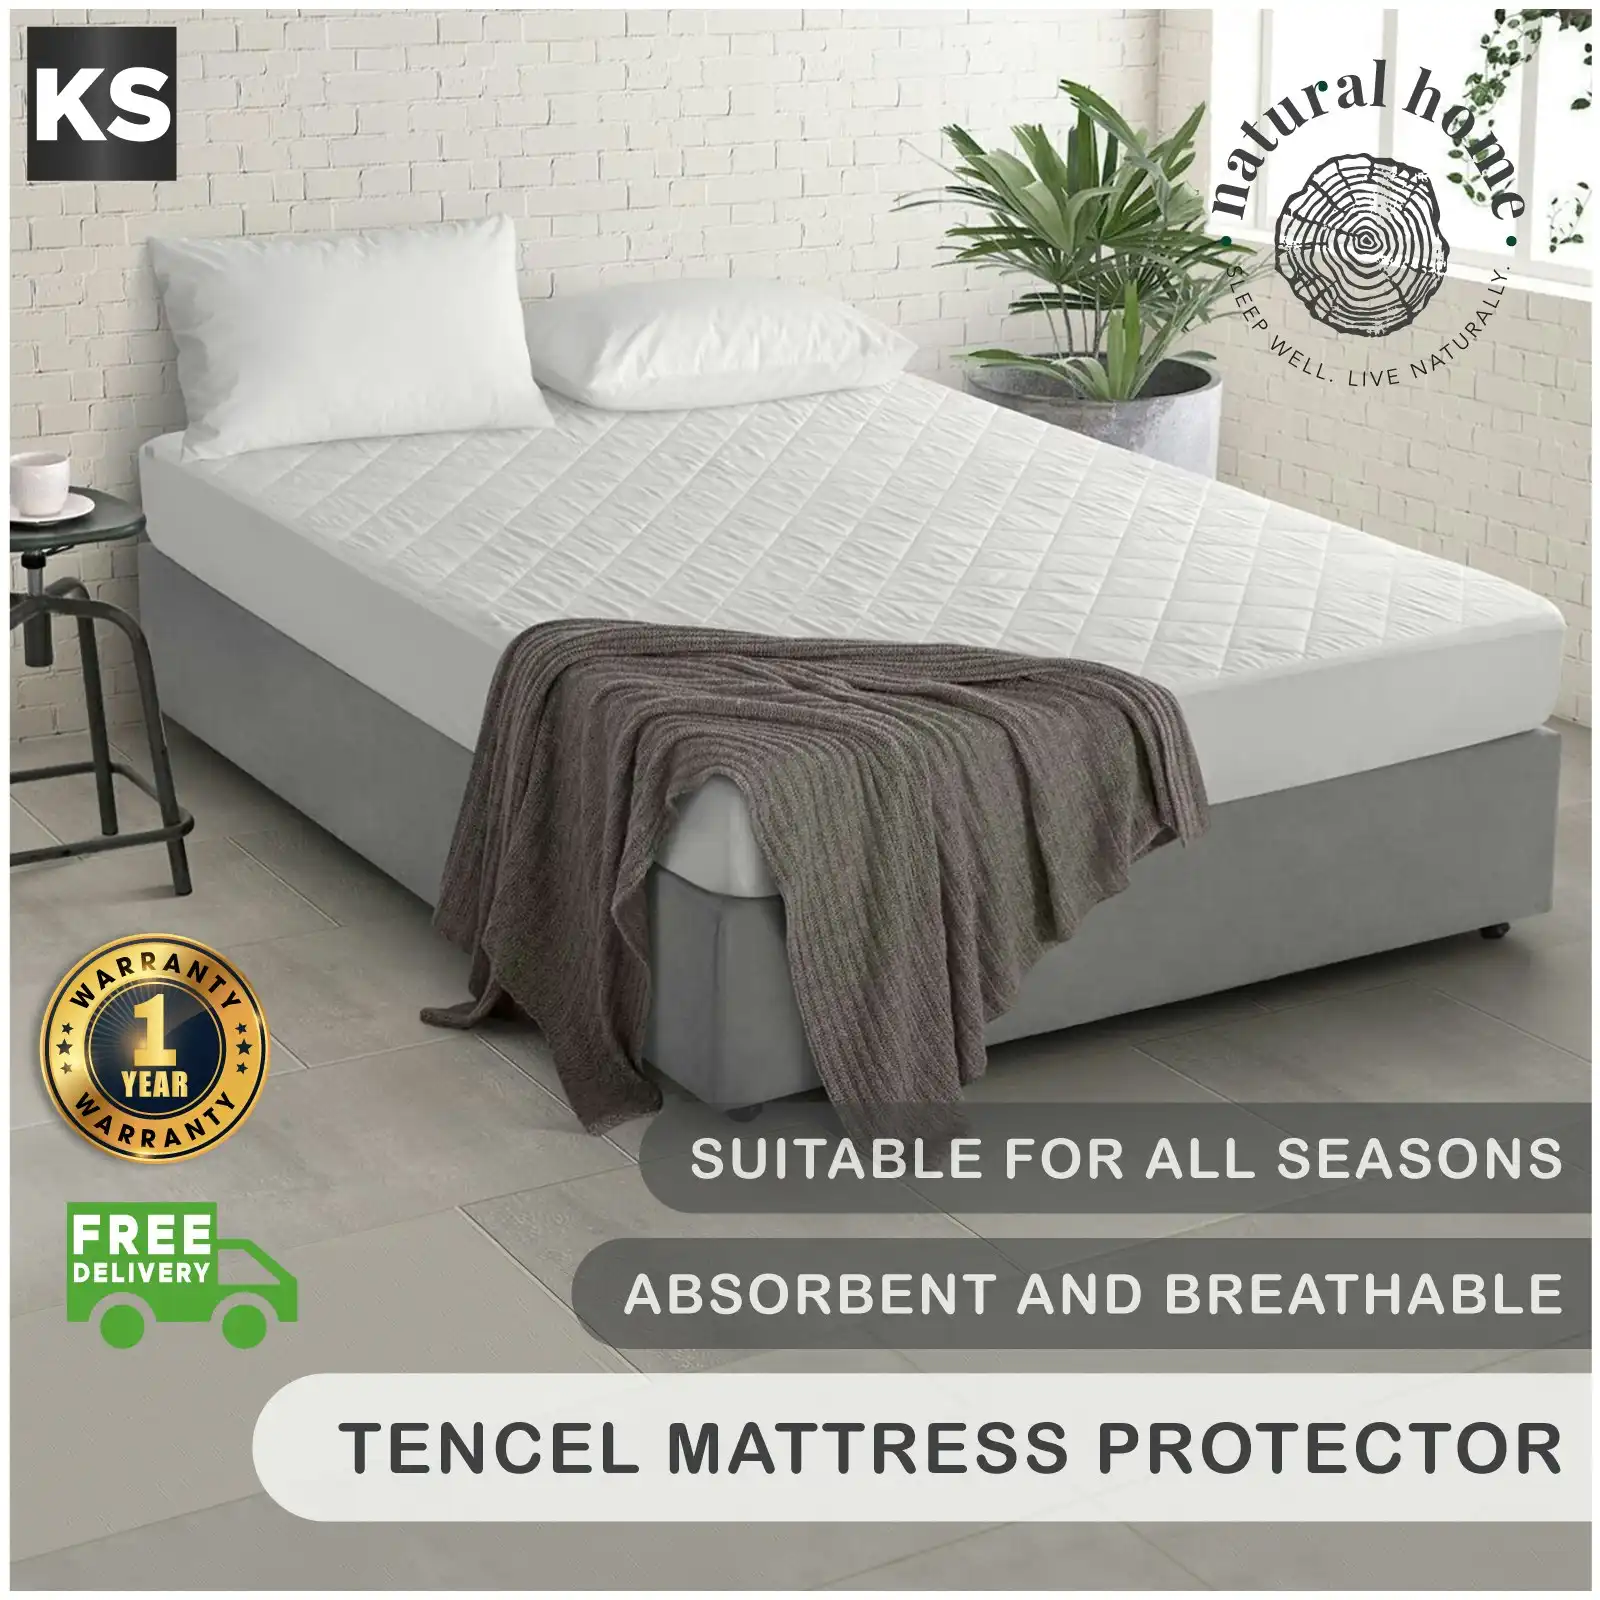 Natural Home Tencel Quilted Mattress Protector White King Single Bed